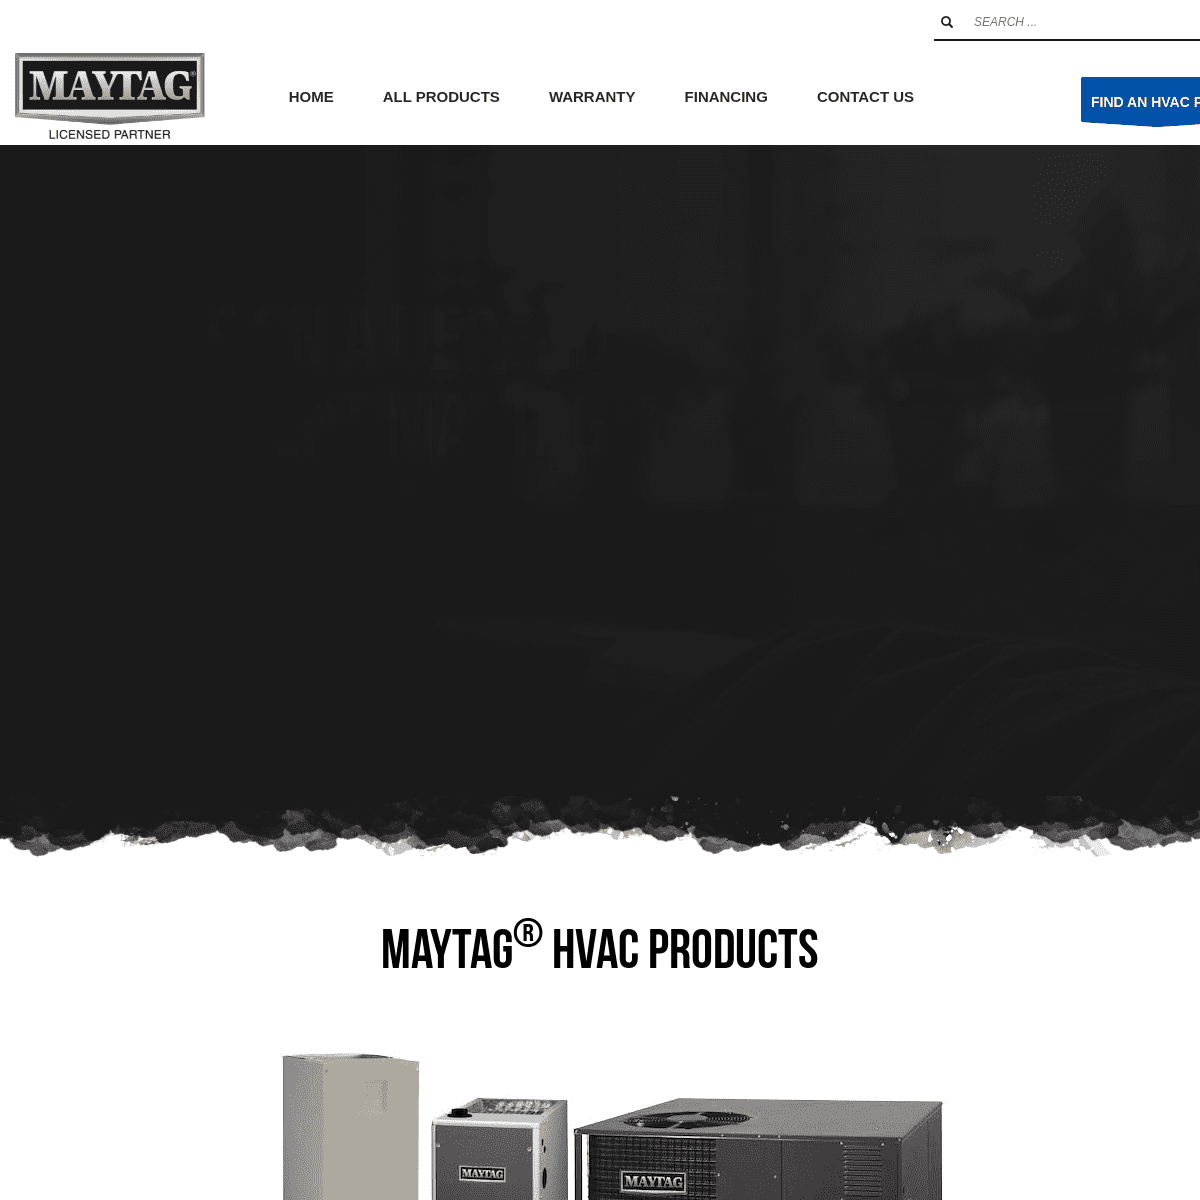 A complete backup of https://maytaghvac.com